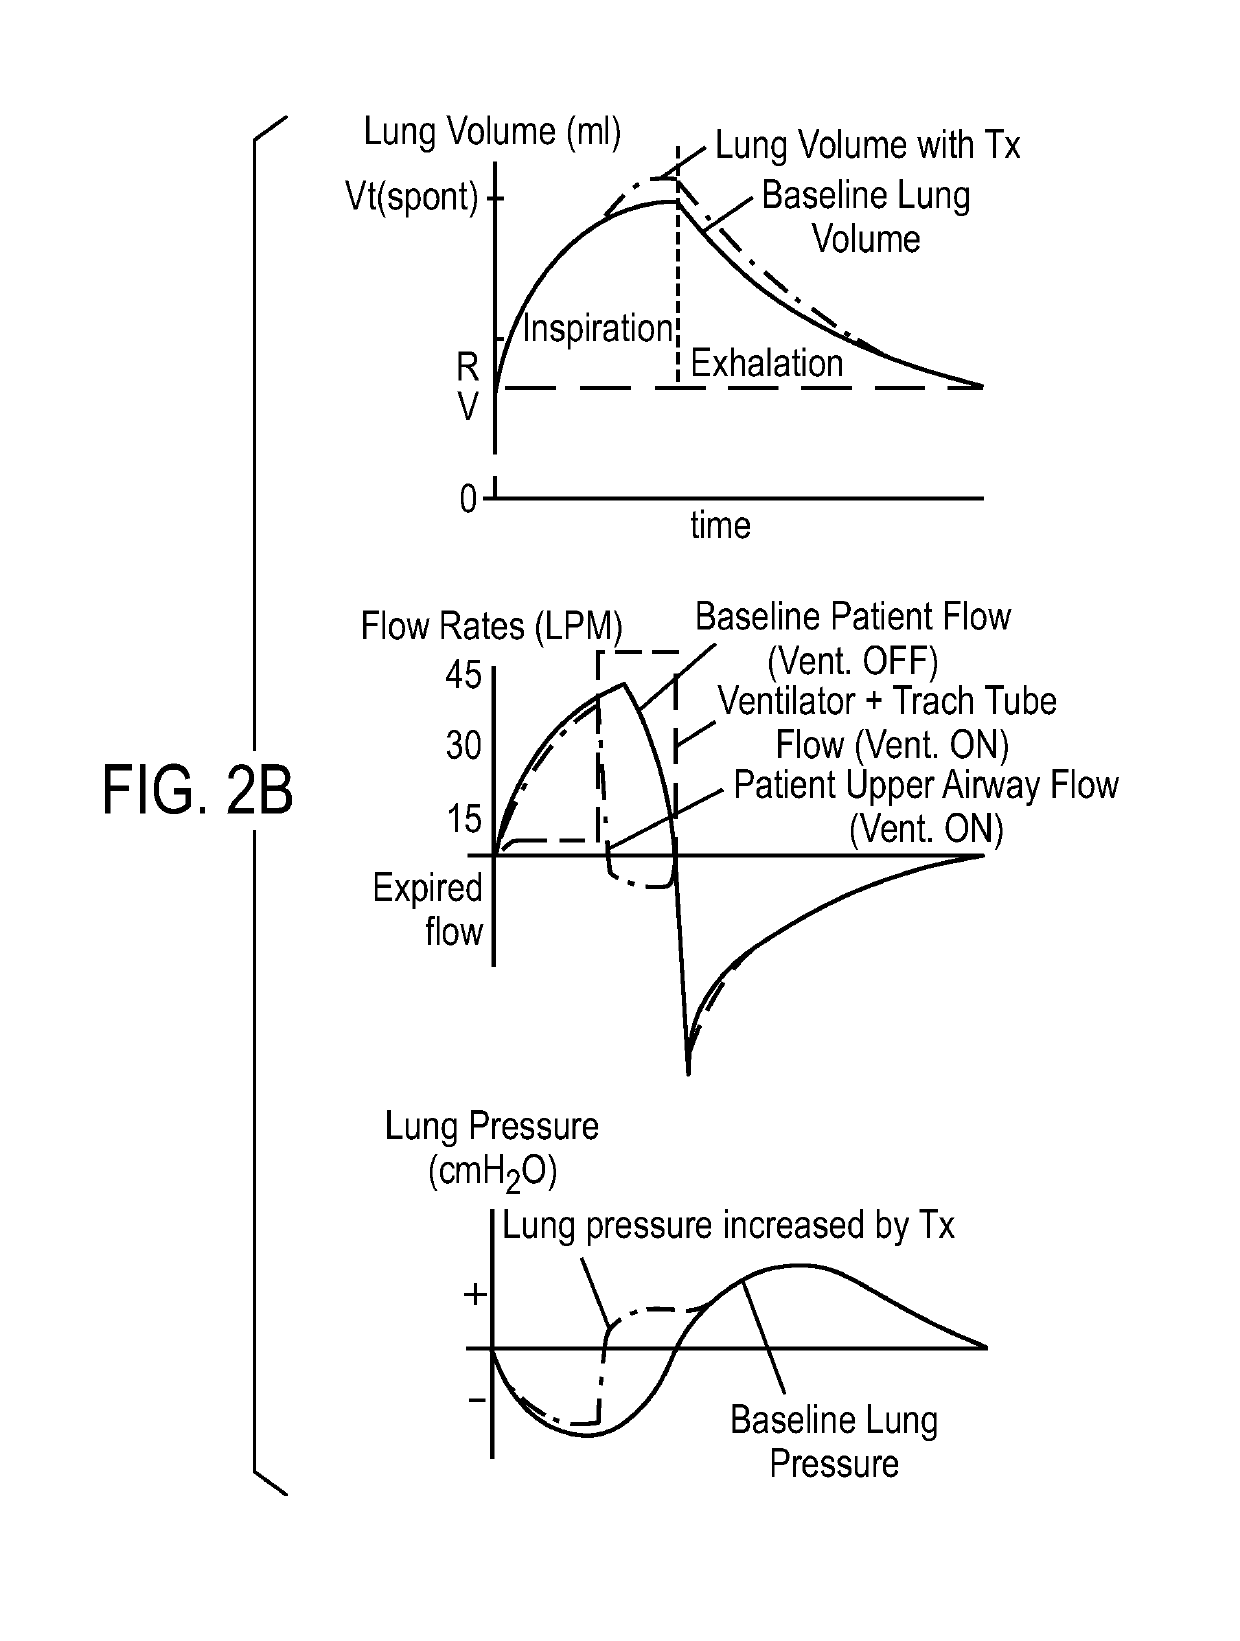 Ventilator with biofeedback monitoring and control for improving patient activity and health